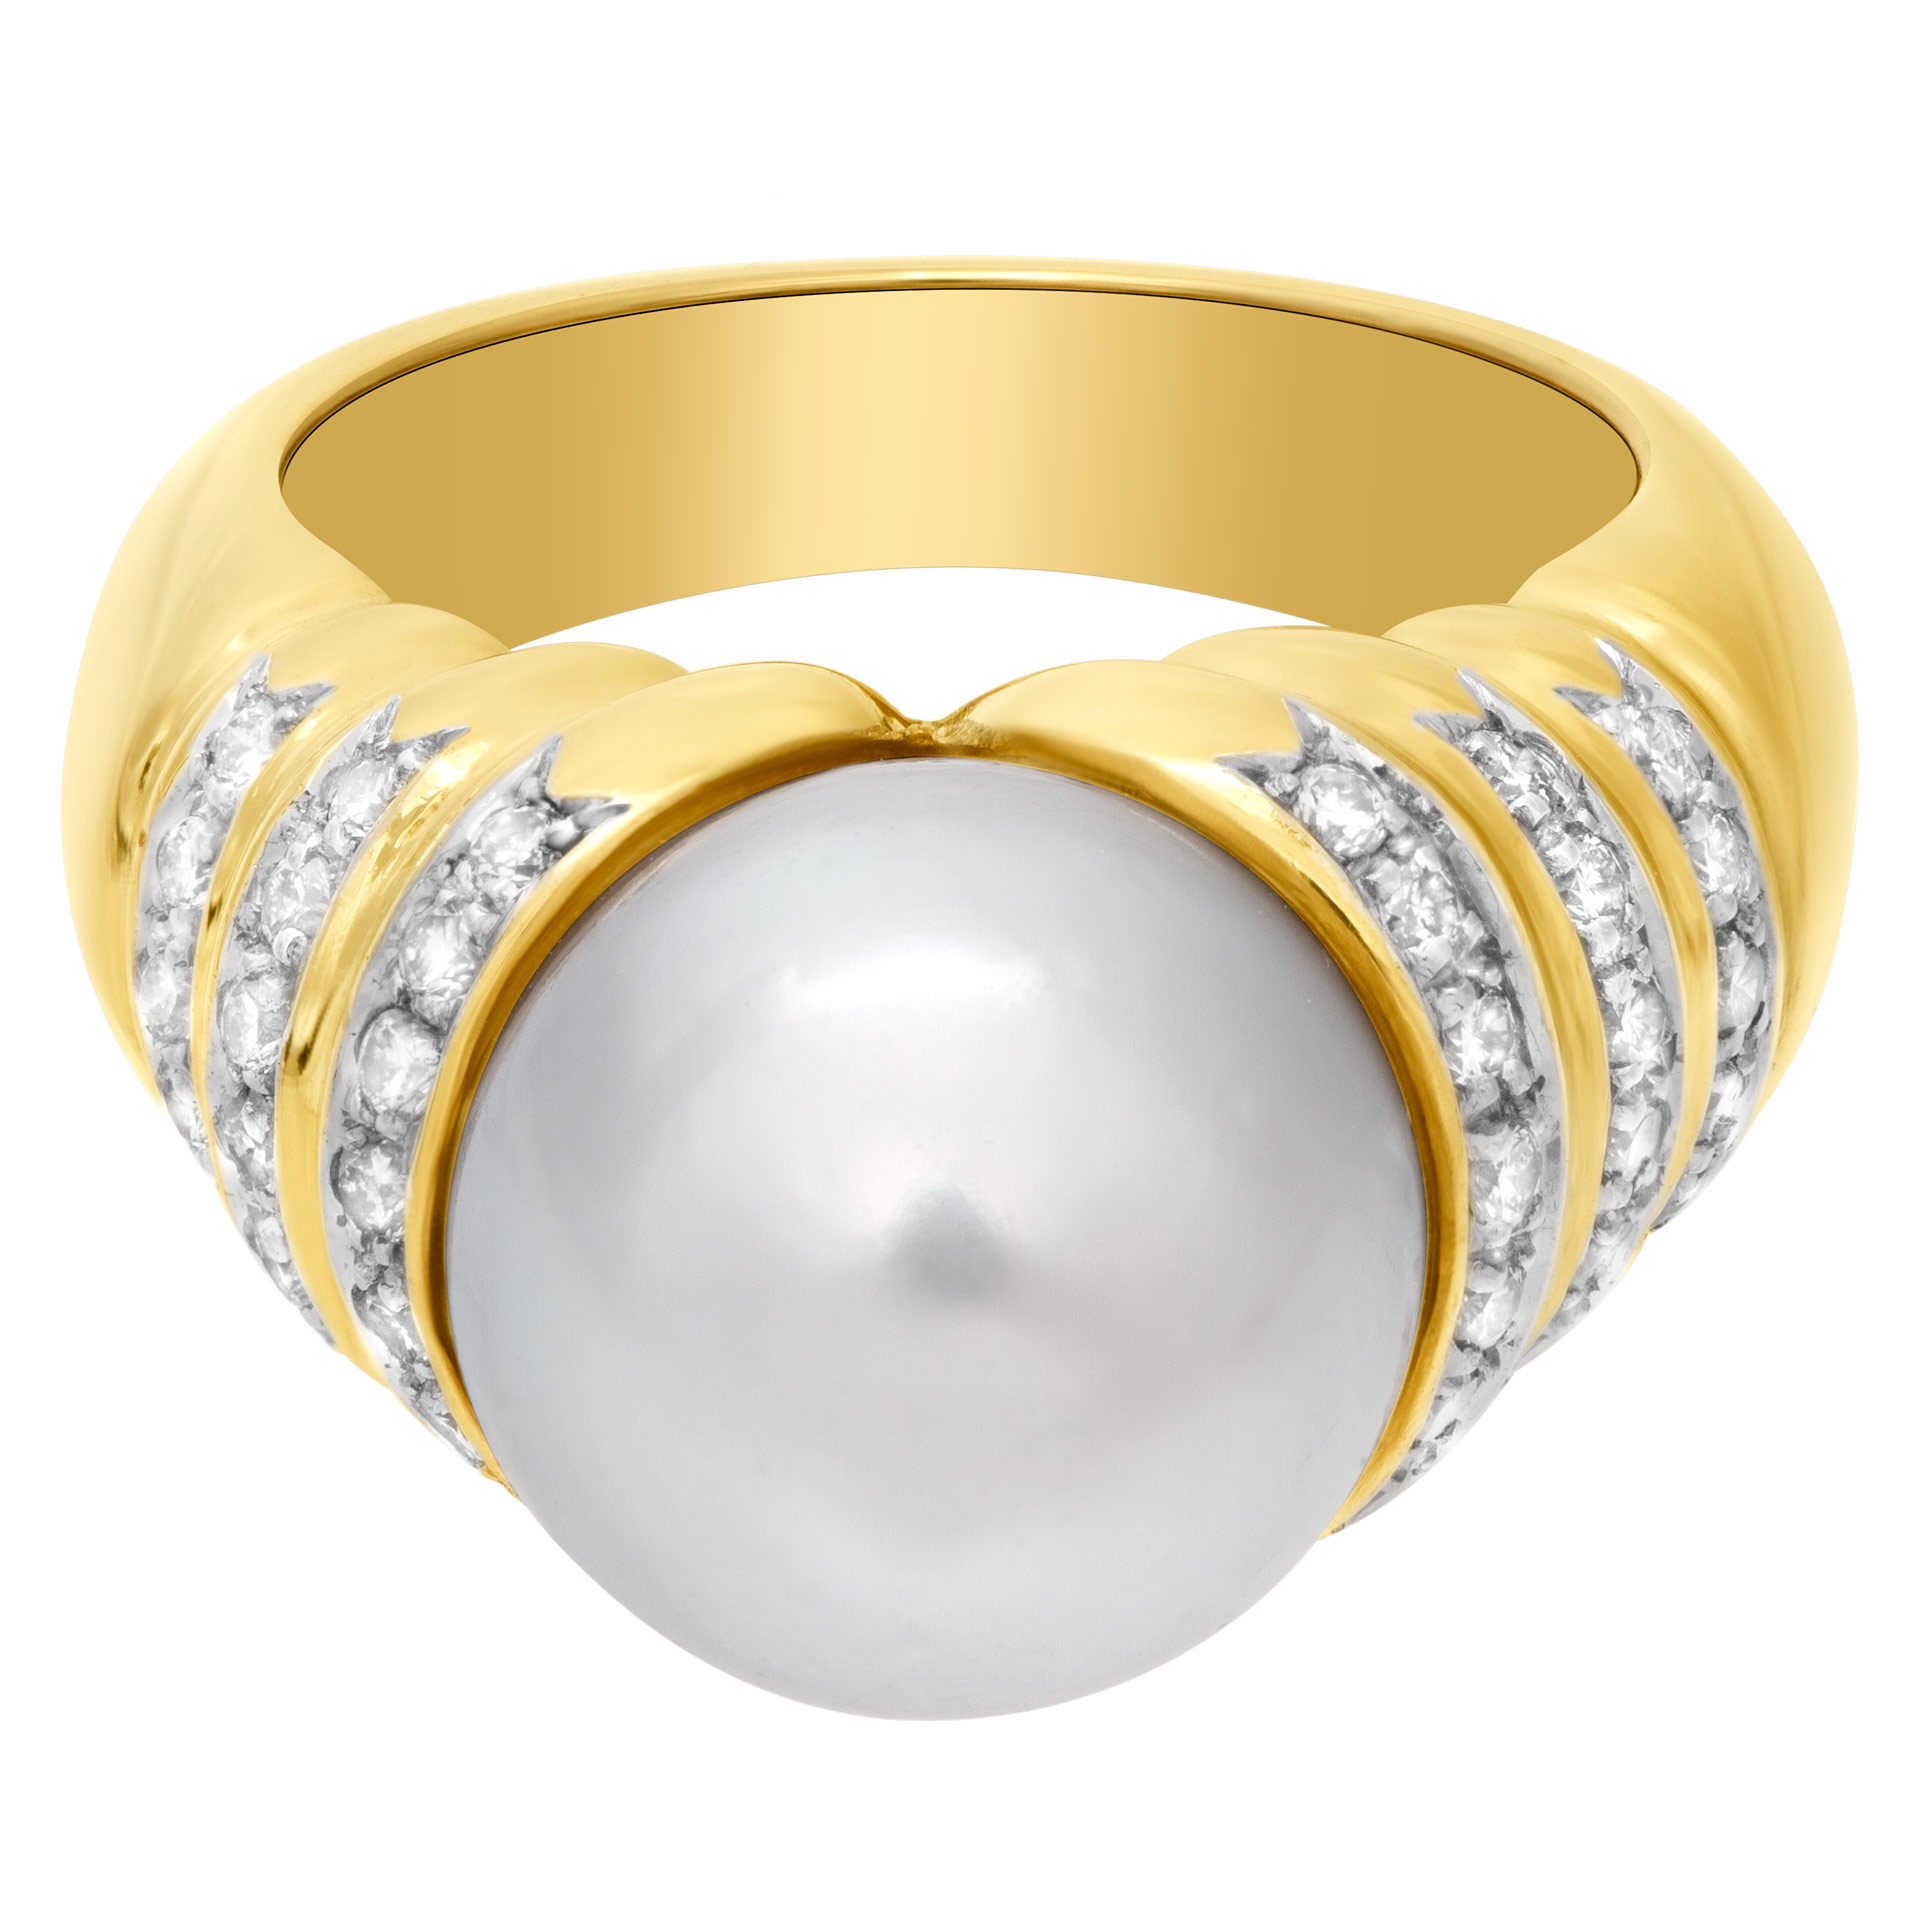 Pearl and diamond ring in 18k